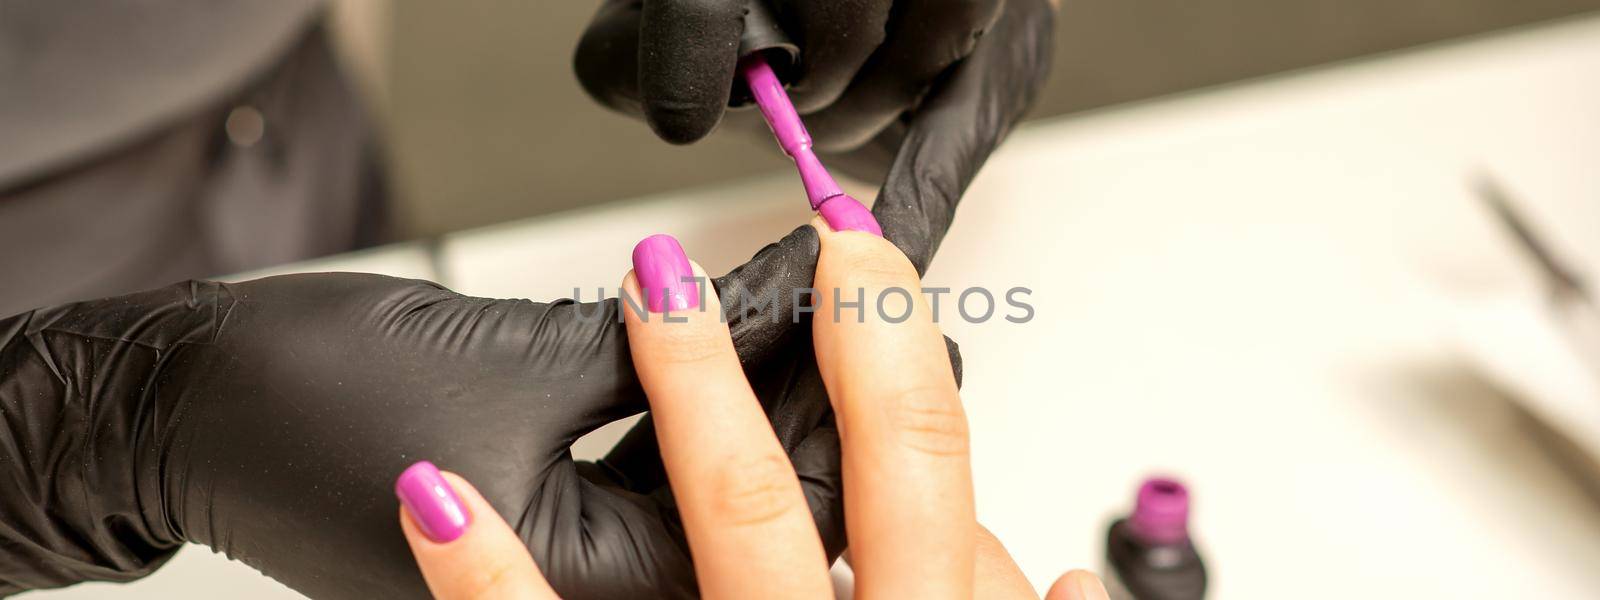 Professional manicure. A manicurist is painting the female nails of a client with purple nail polish in a beauty salon, close up. Beauty industry concept